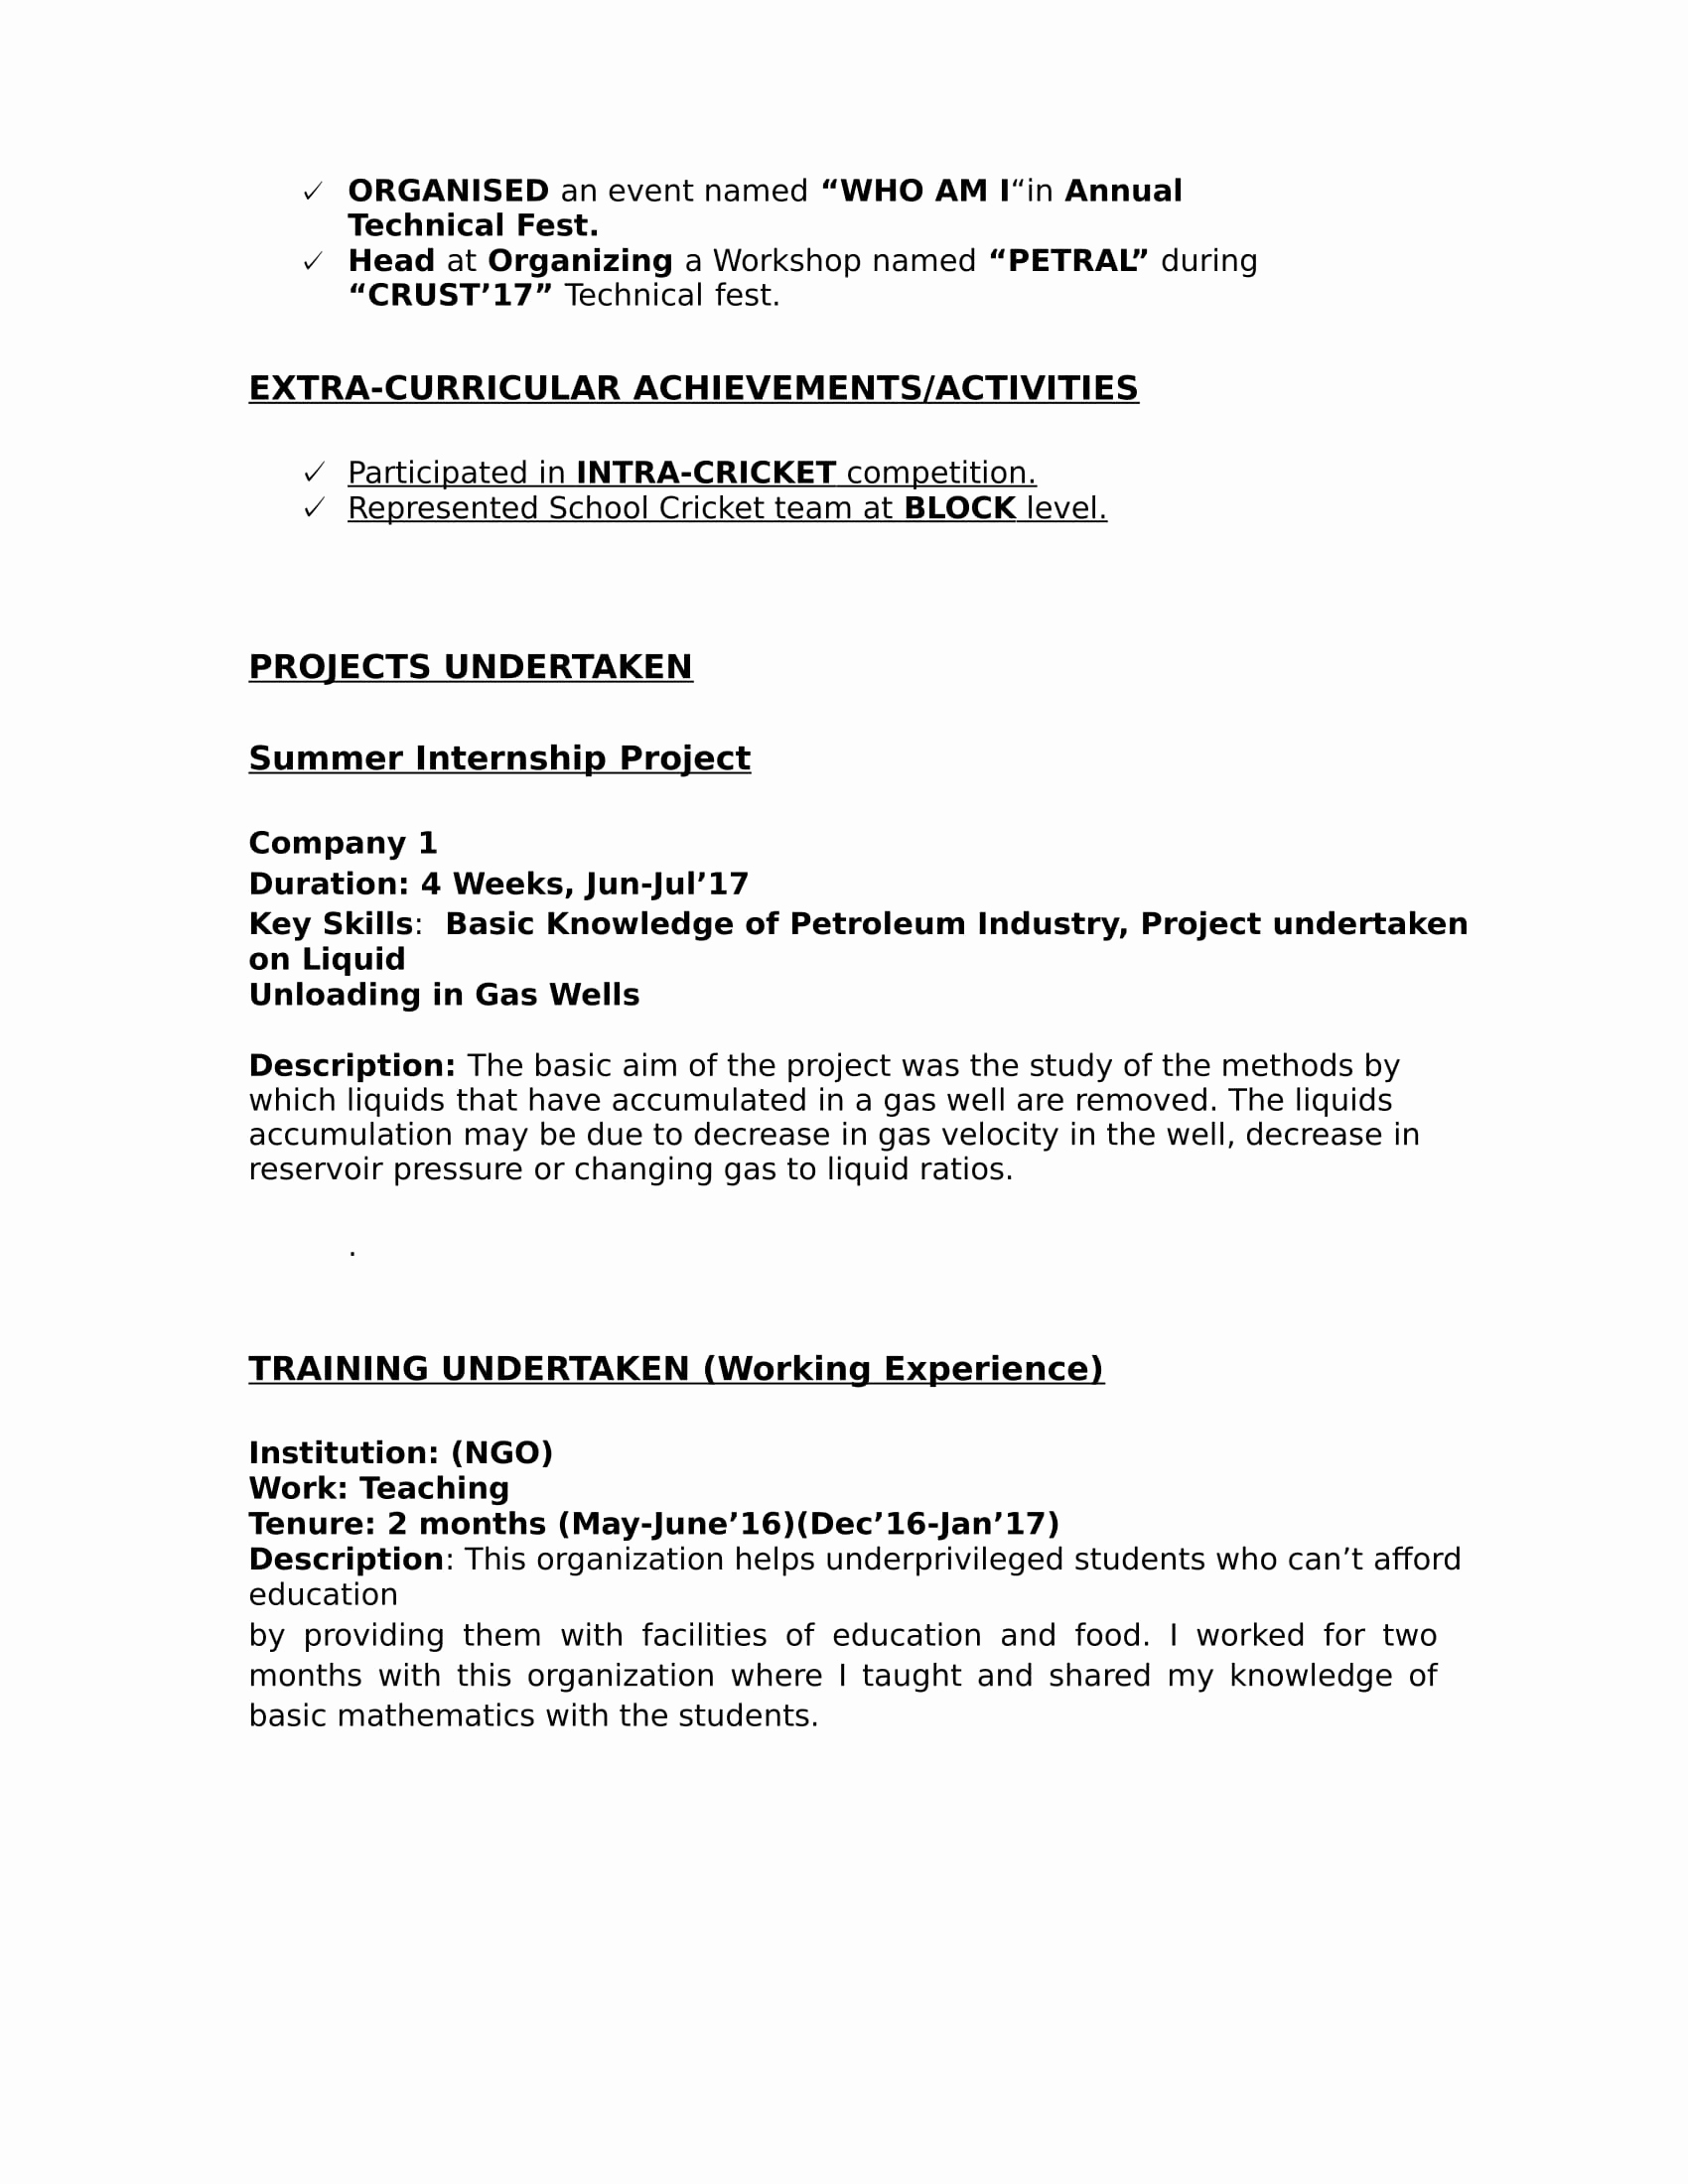 Resume Samples for Freshers Lovely 32 Resume Templates for Freshers Download Free Word format